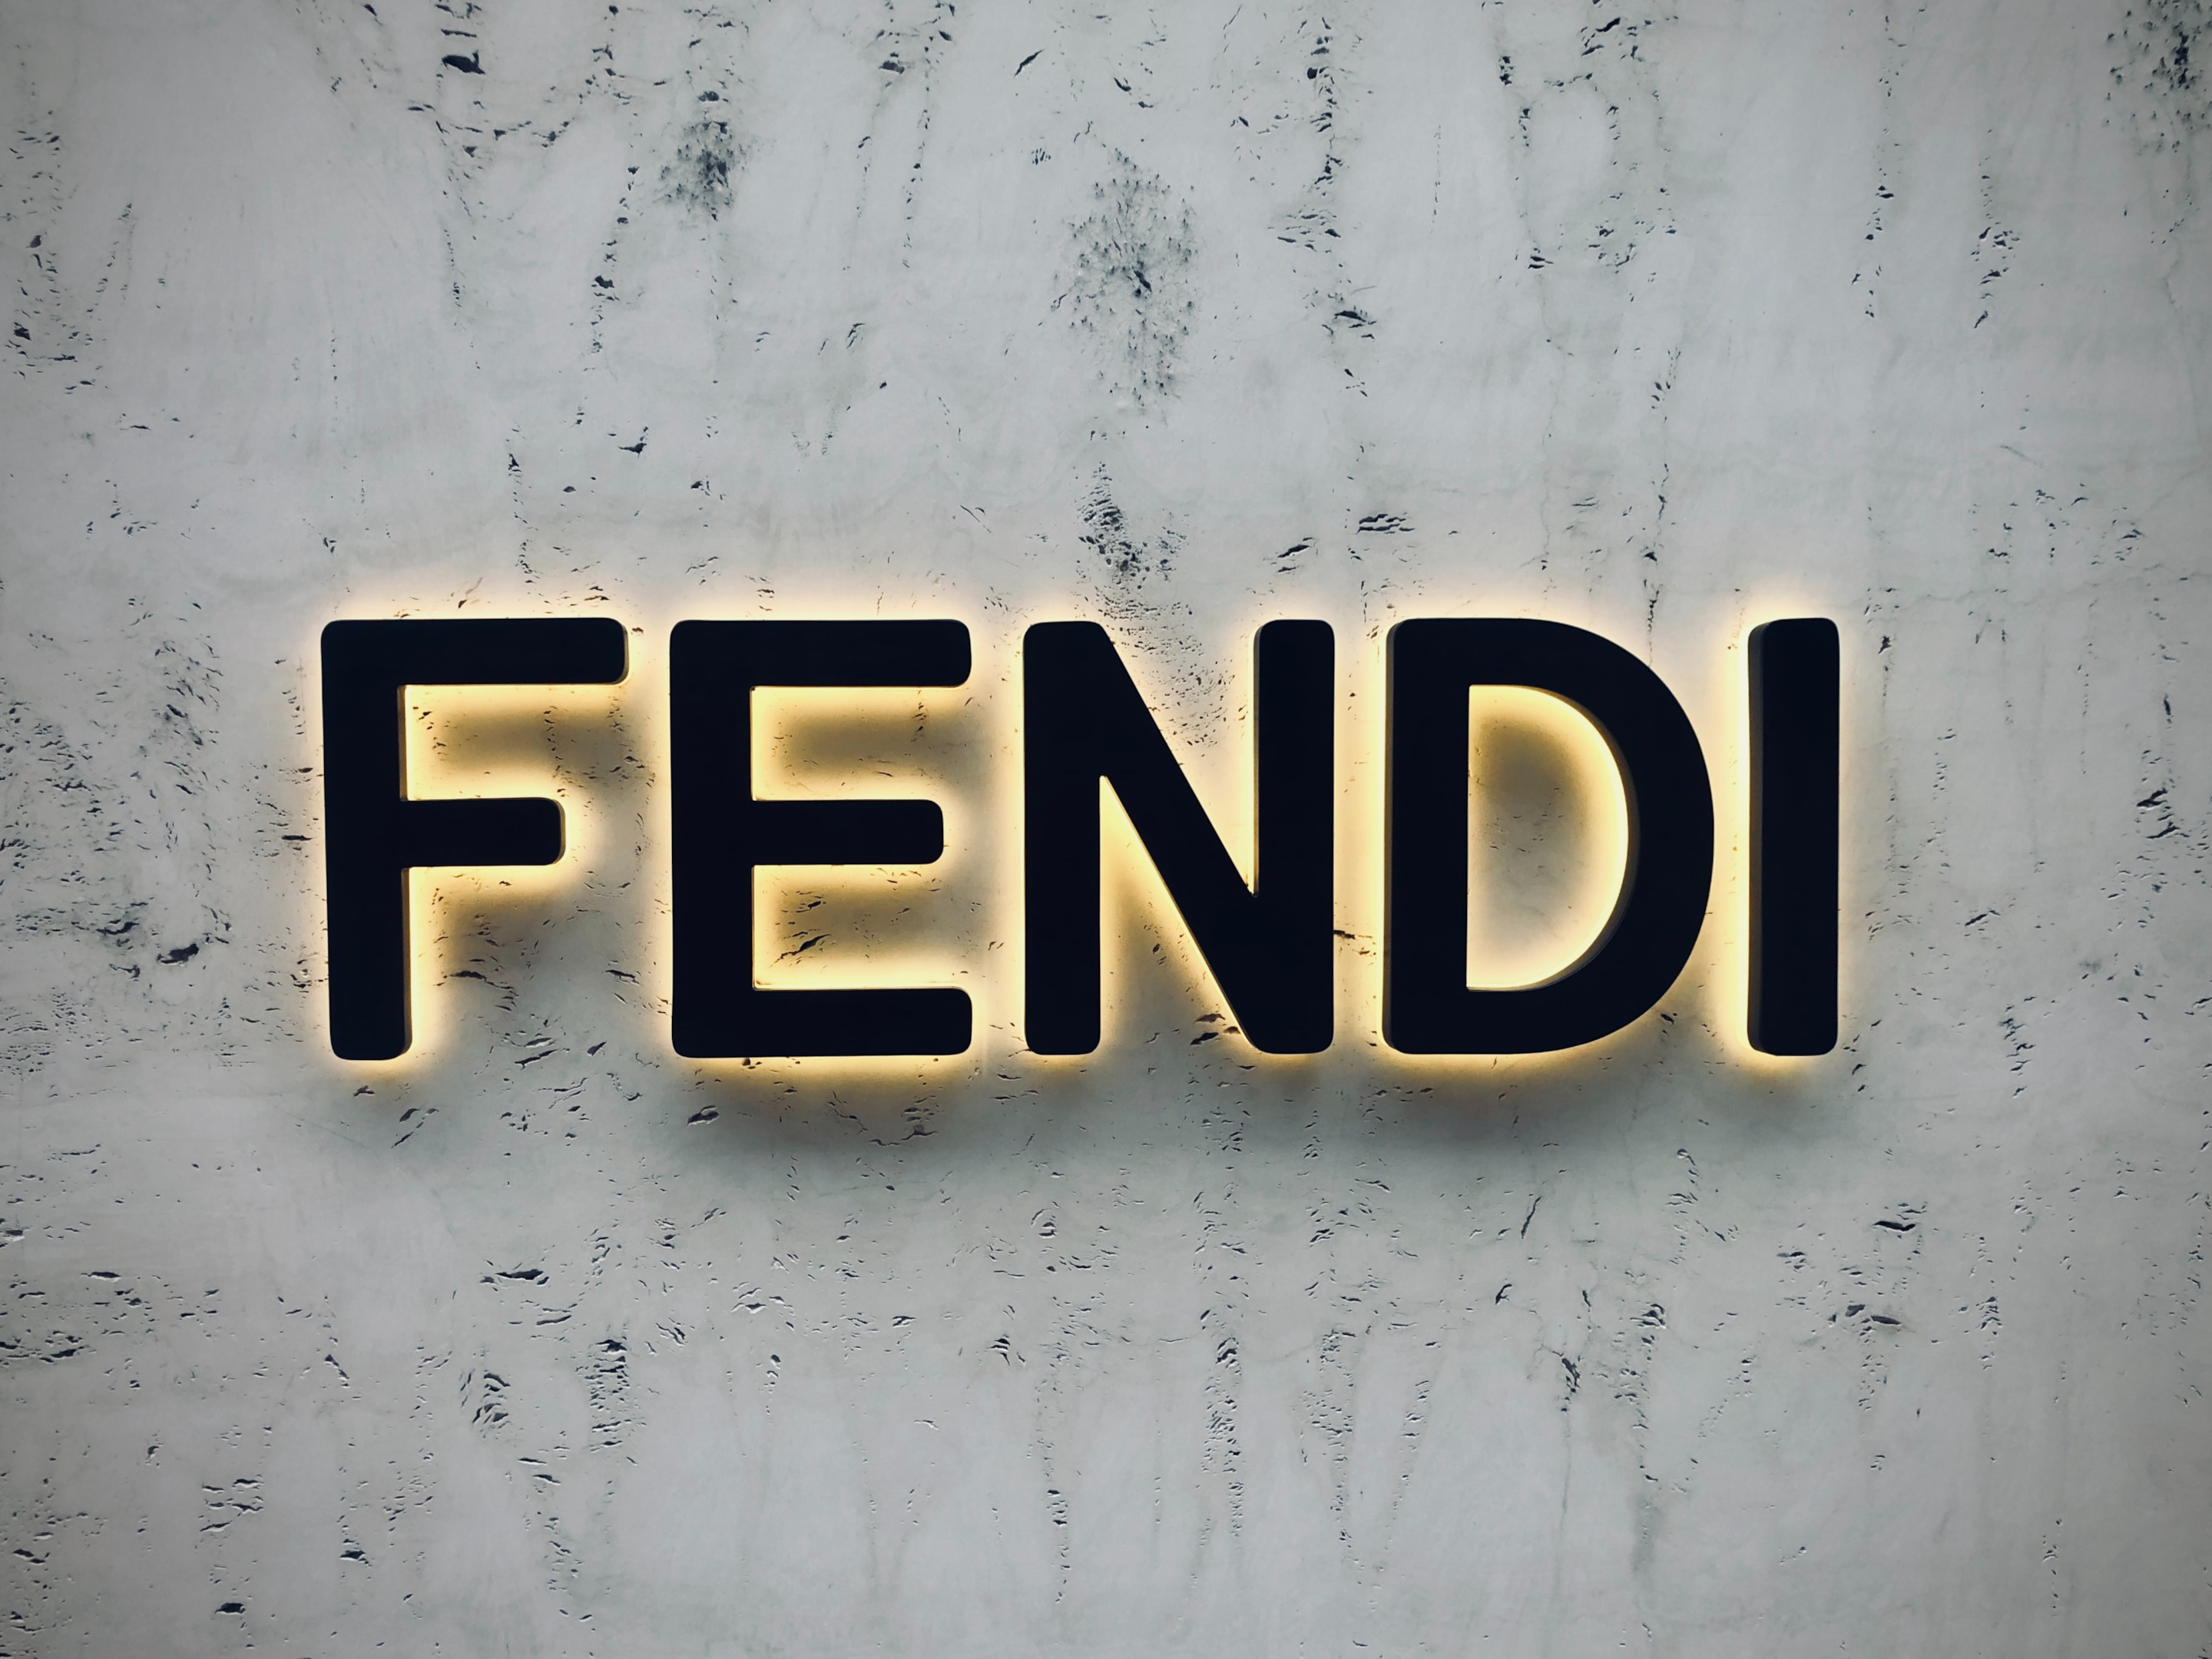 Fendi is mostly known for its fur items and leather goods | Photo by Arno Senoner from Unsplash